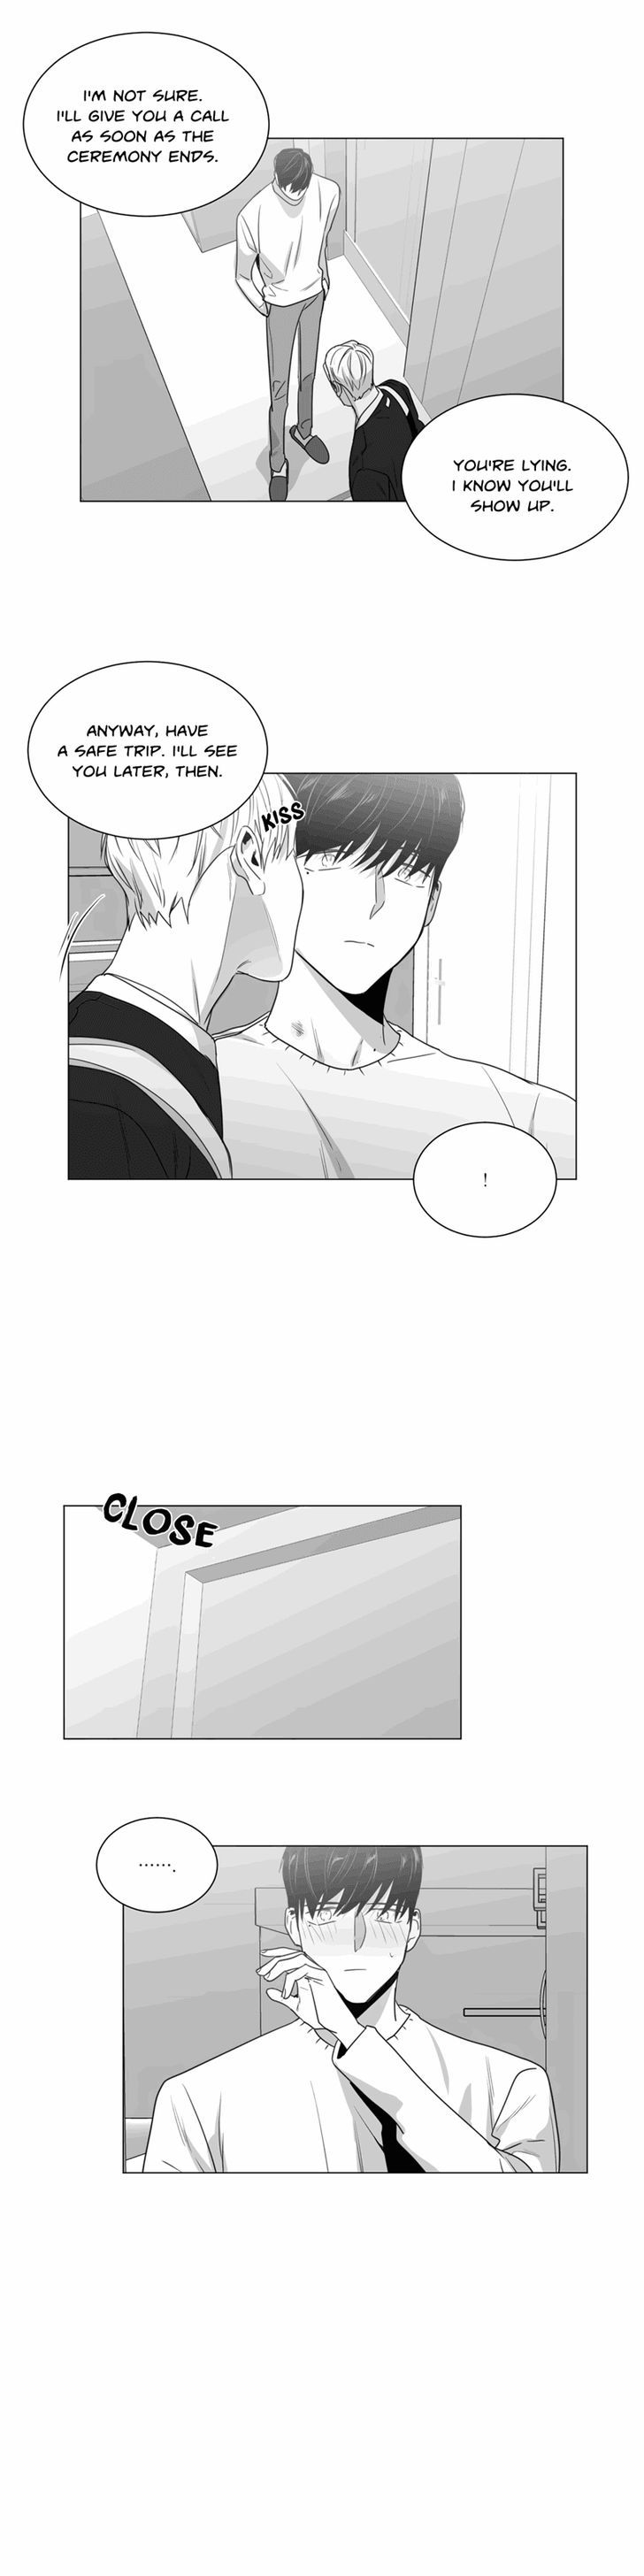 Lover Boy (Lezhin) Chapter 031 page 9